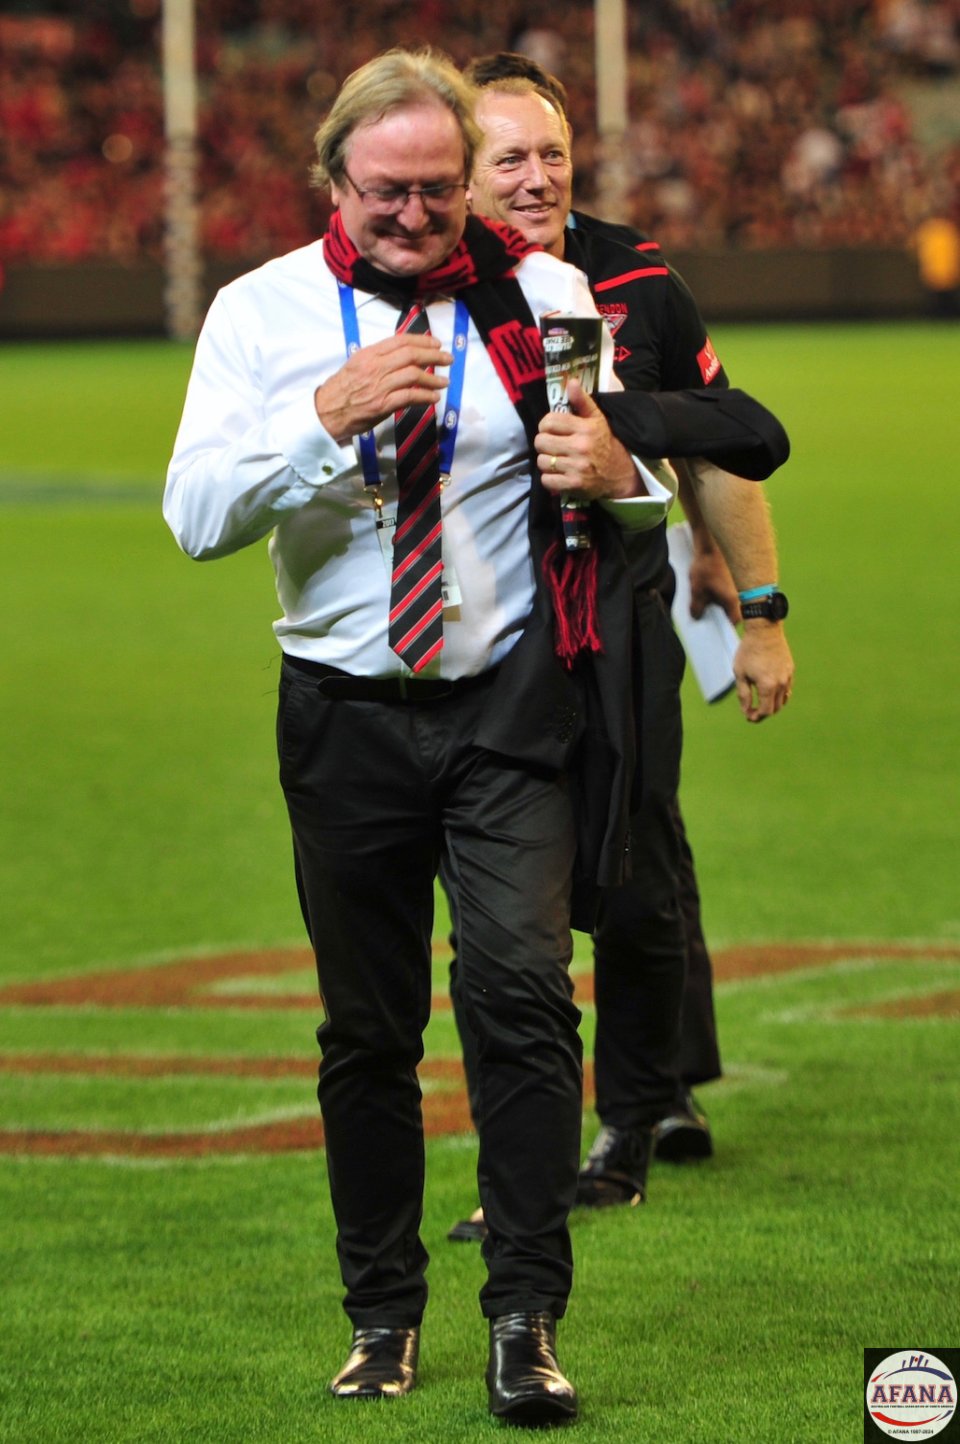 Kevin Sheedy is exstatic after the Bombers win